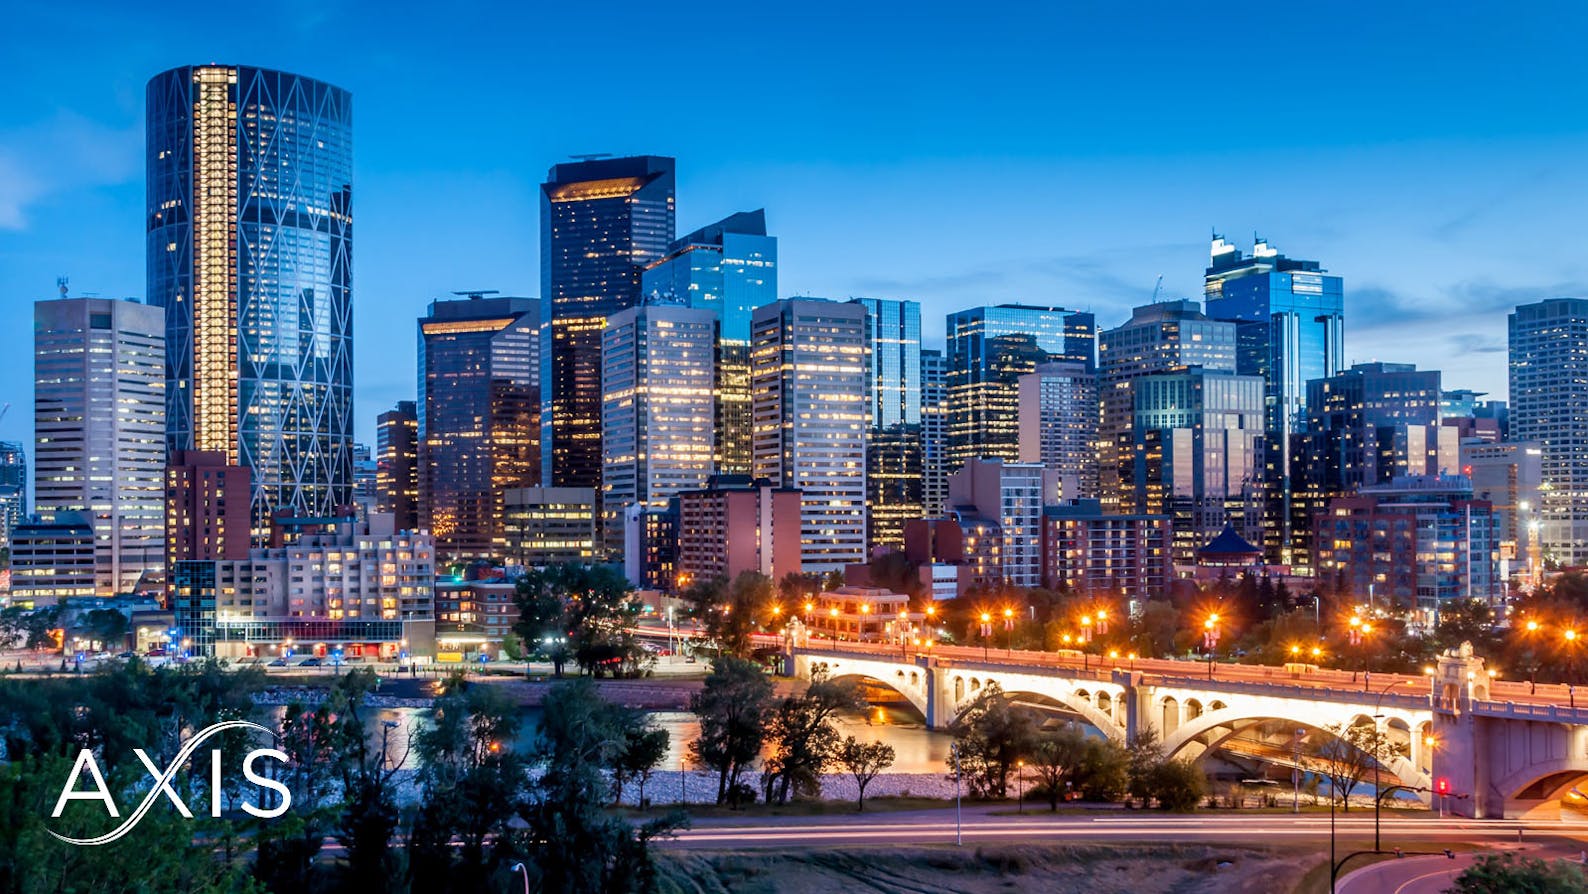 Calgary skyline with Axis Connects logo